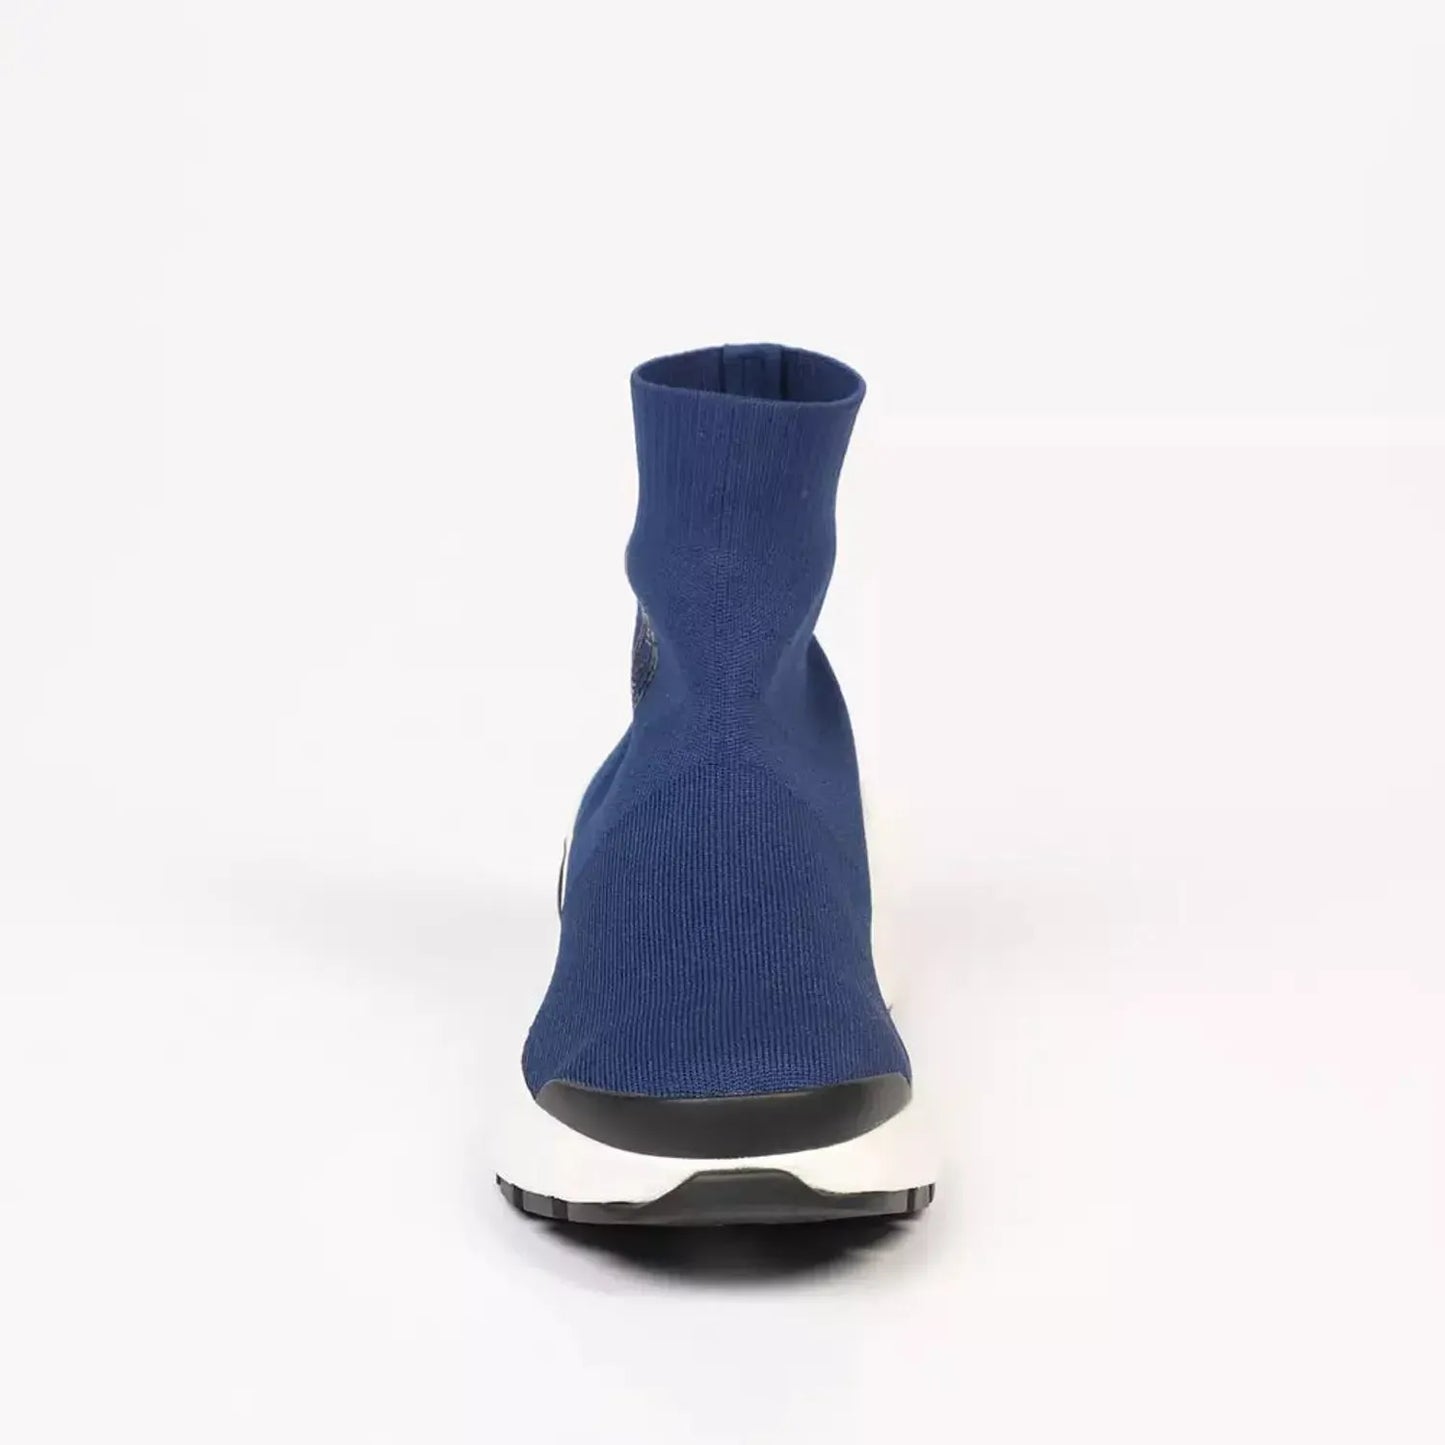 Neil Barrett Electric Bolt Sock Sneakers in Blue blue-textile-lining-sneaker stock_product_image_21105_1828855913-18-7be7e610-631.webp